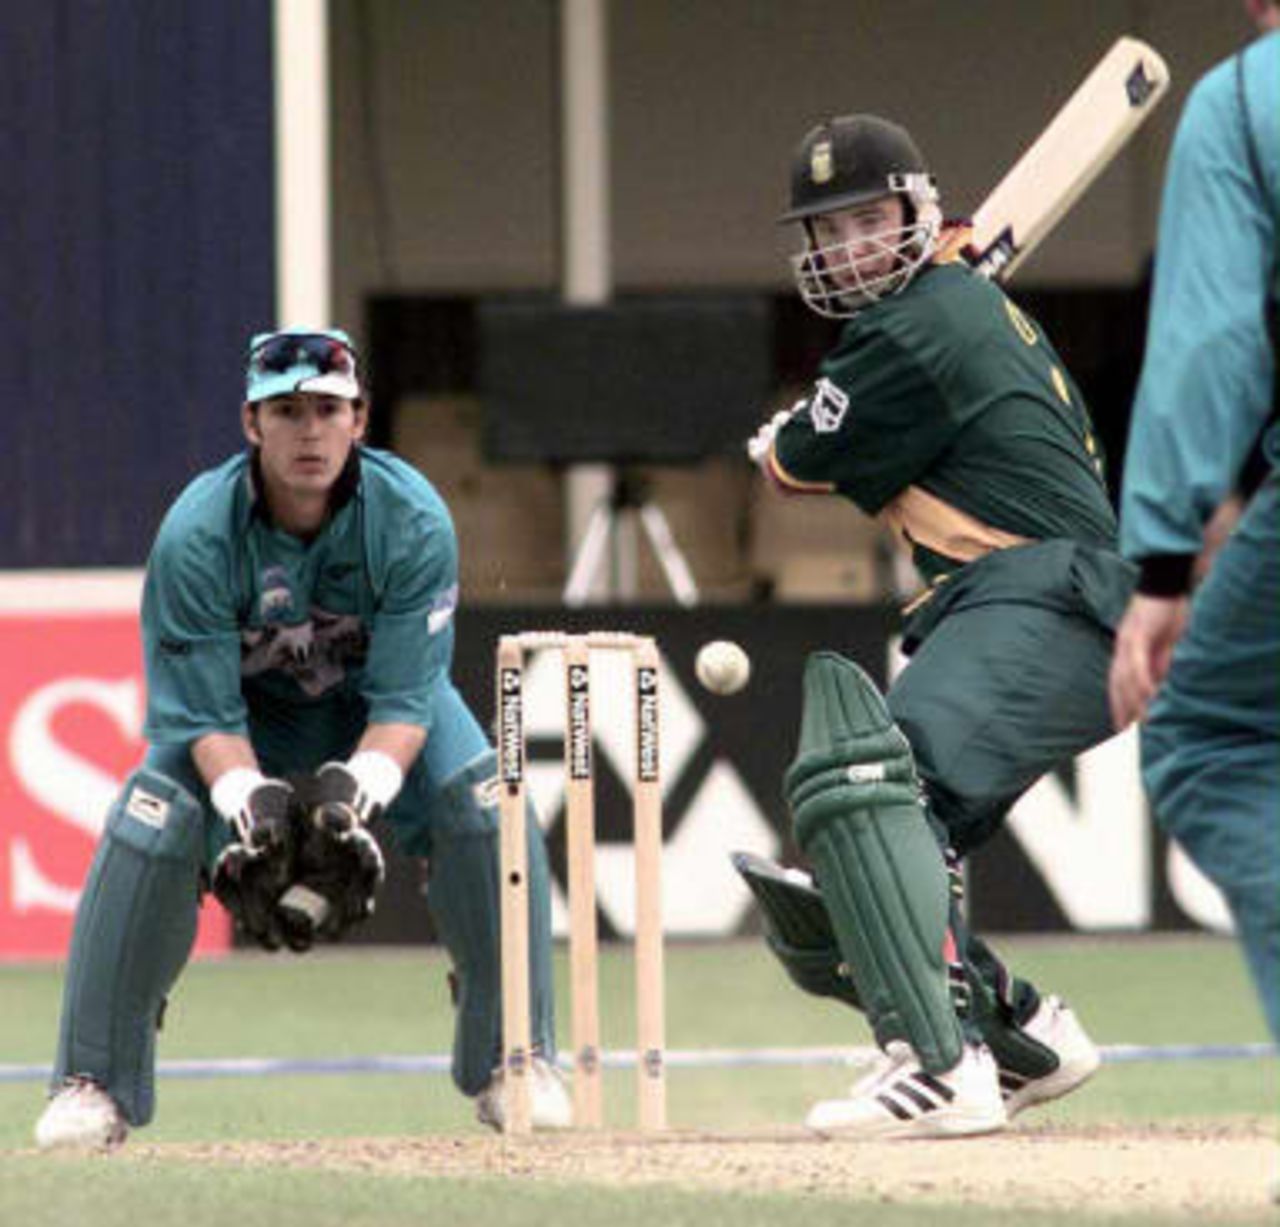 South Africa's top scorer Hershelle Gibbs with 91 runs lines up a shot off the bowling of New Zealand's Chris Harris during the Cricket World Cup Super Six match at Edgbaston 10 June 1999